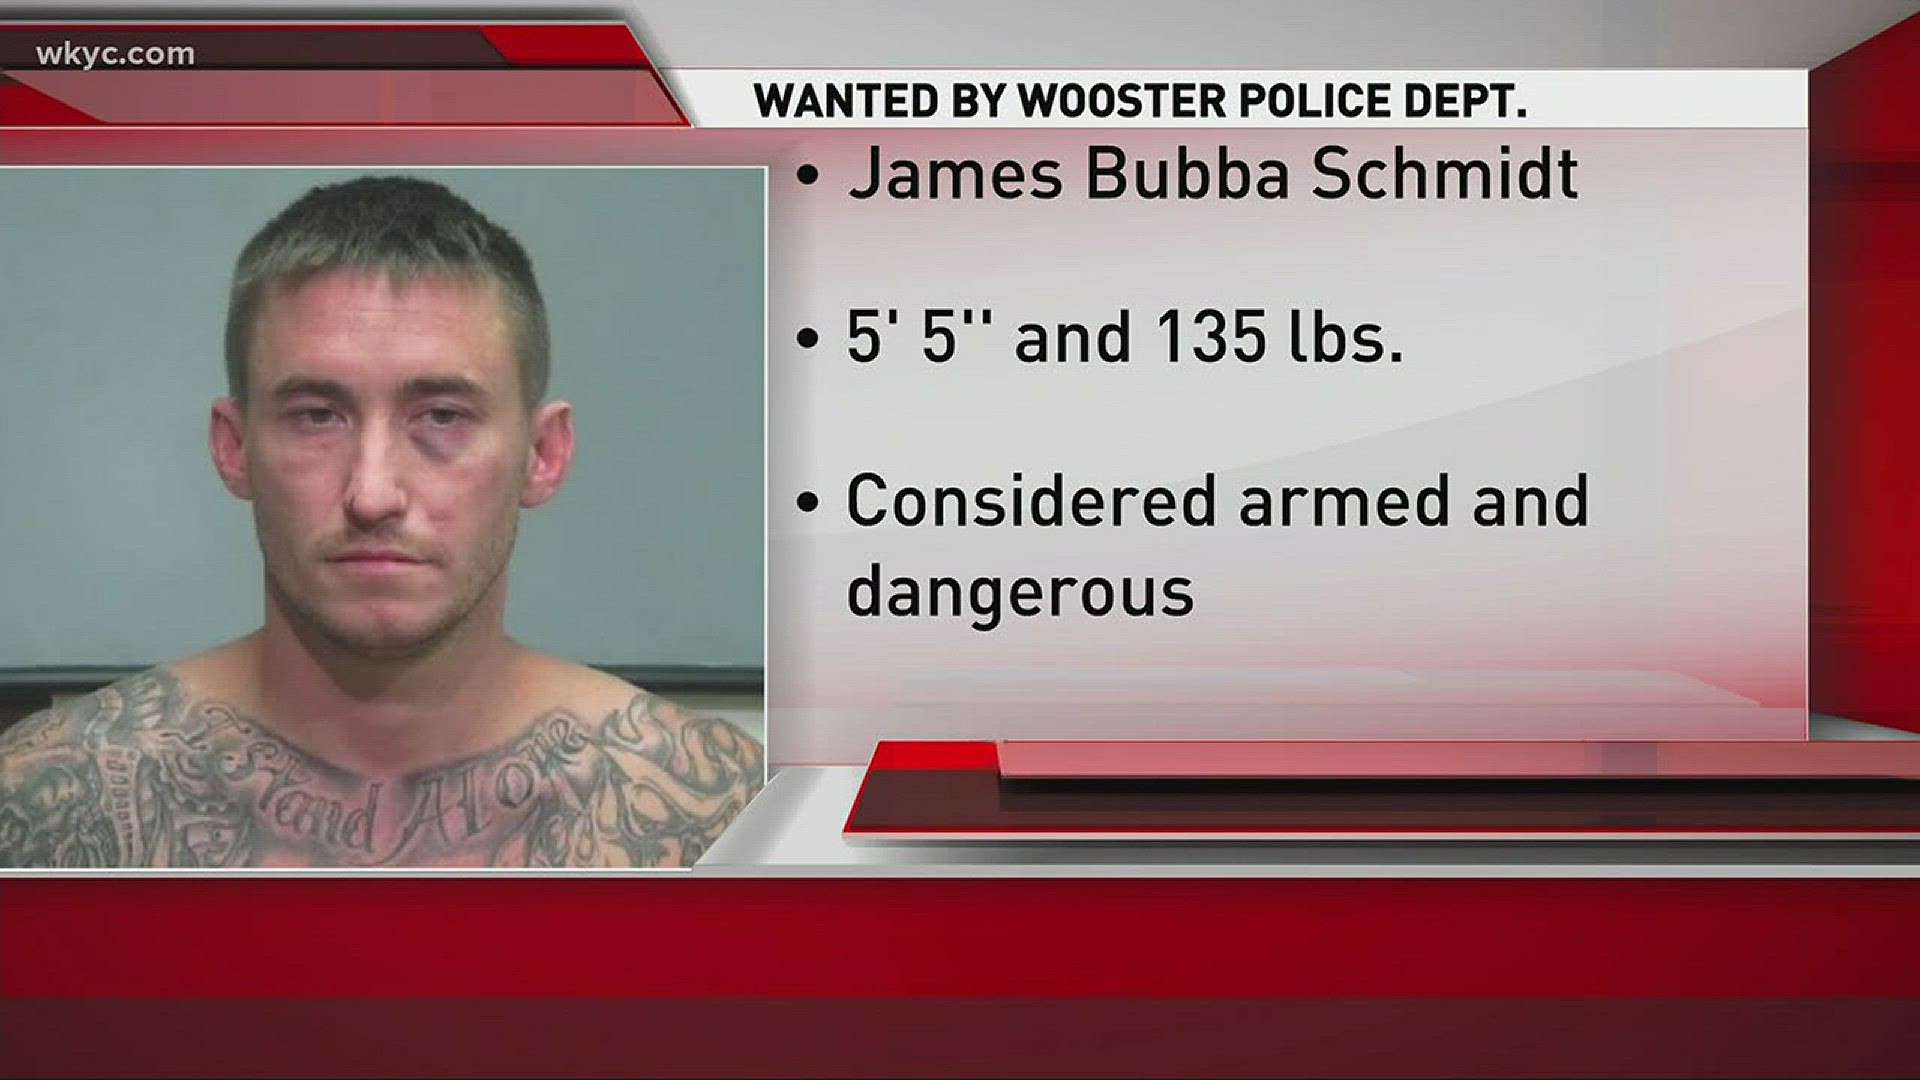 Dec. 5, 2017: Police are searching for James Bubba Schmidt, a wanted fugitive, who allegedly shot at police officers during a high-speed chase.